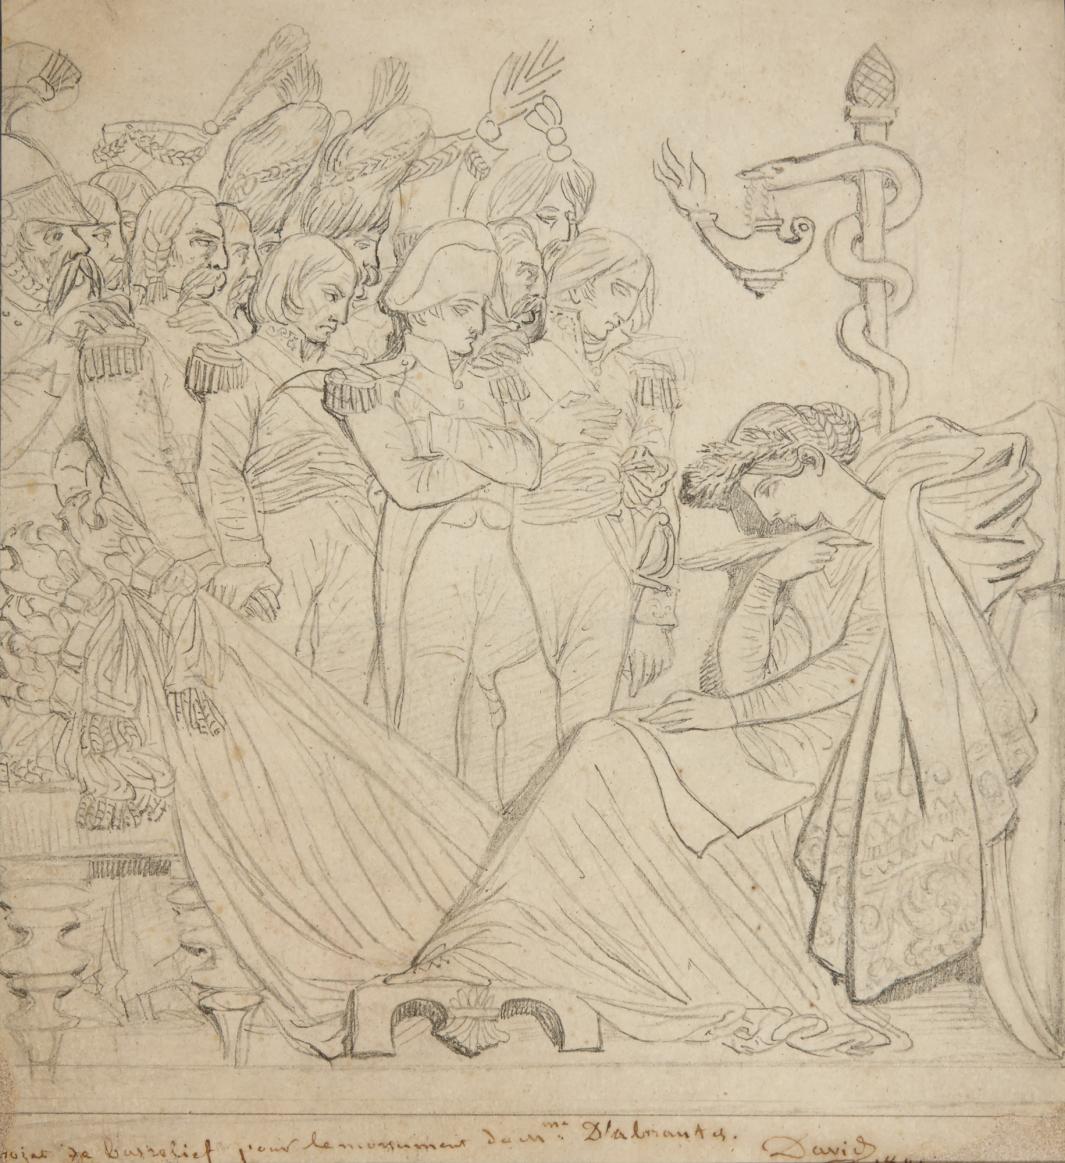 graphite drawing of seated woman wearing garland, with a company of men in European military uniform standing before her